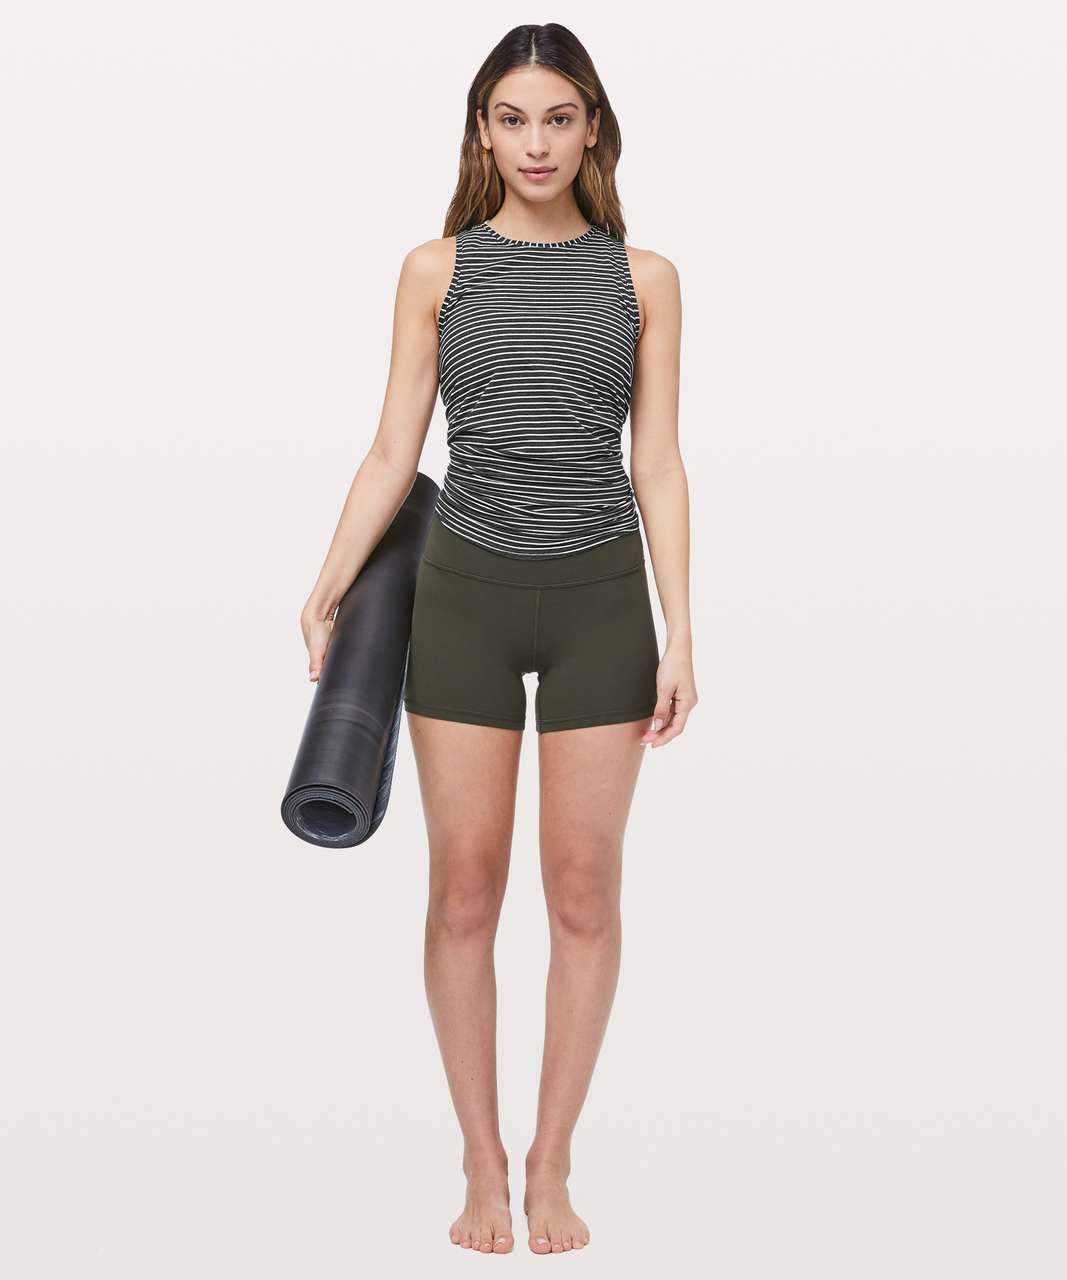 Lululemon All Tied Up Tank - Modern Stripe Heathered Black White (First Release)